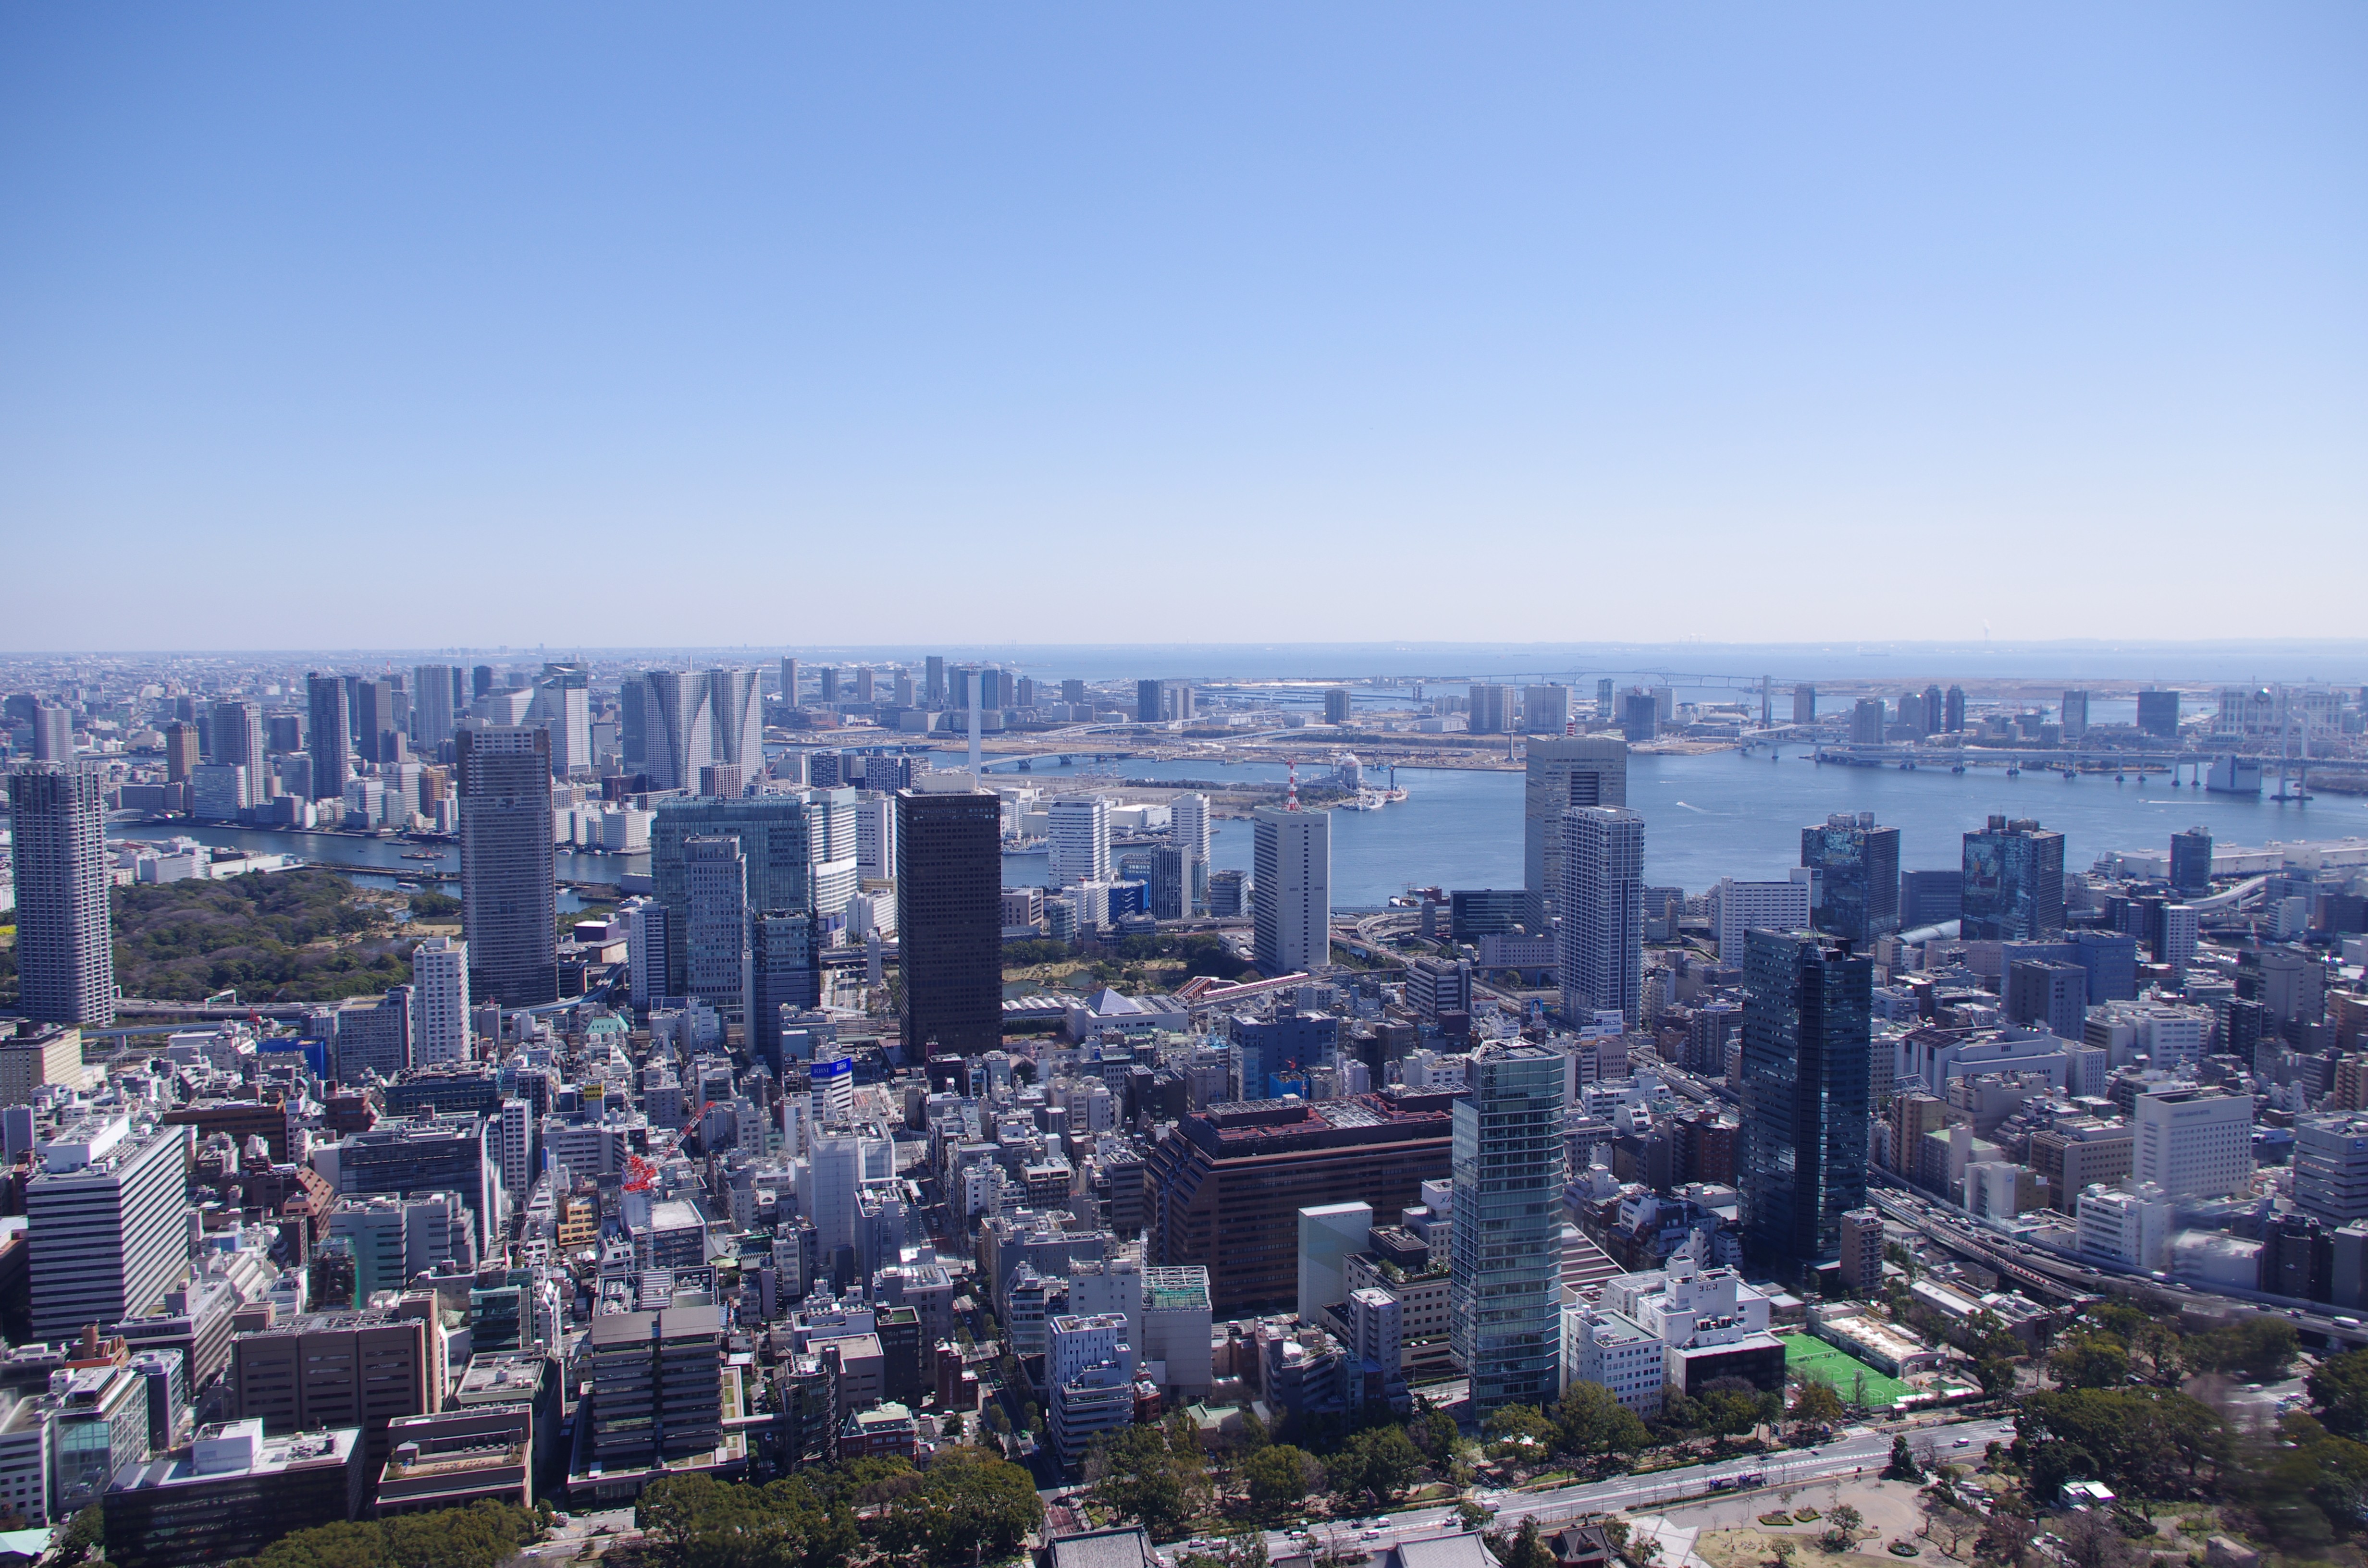 A view from Tokyo Tower, Odaiba in the background and part of Tokyo Bay with Rainbow Bridge